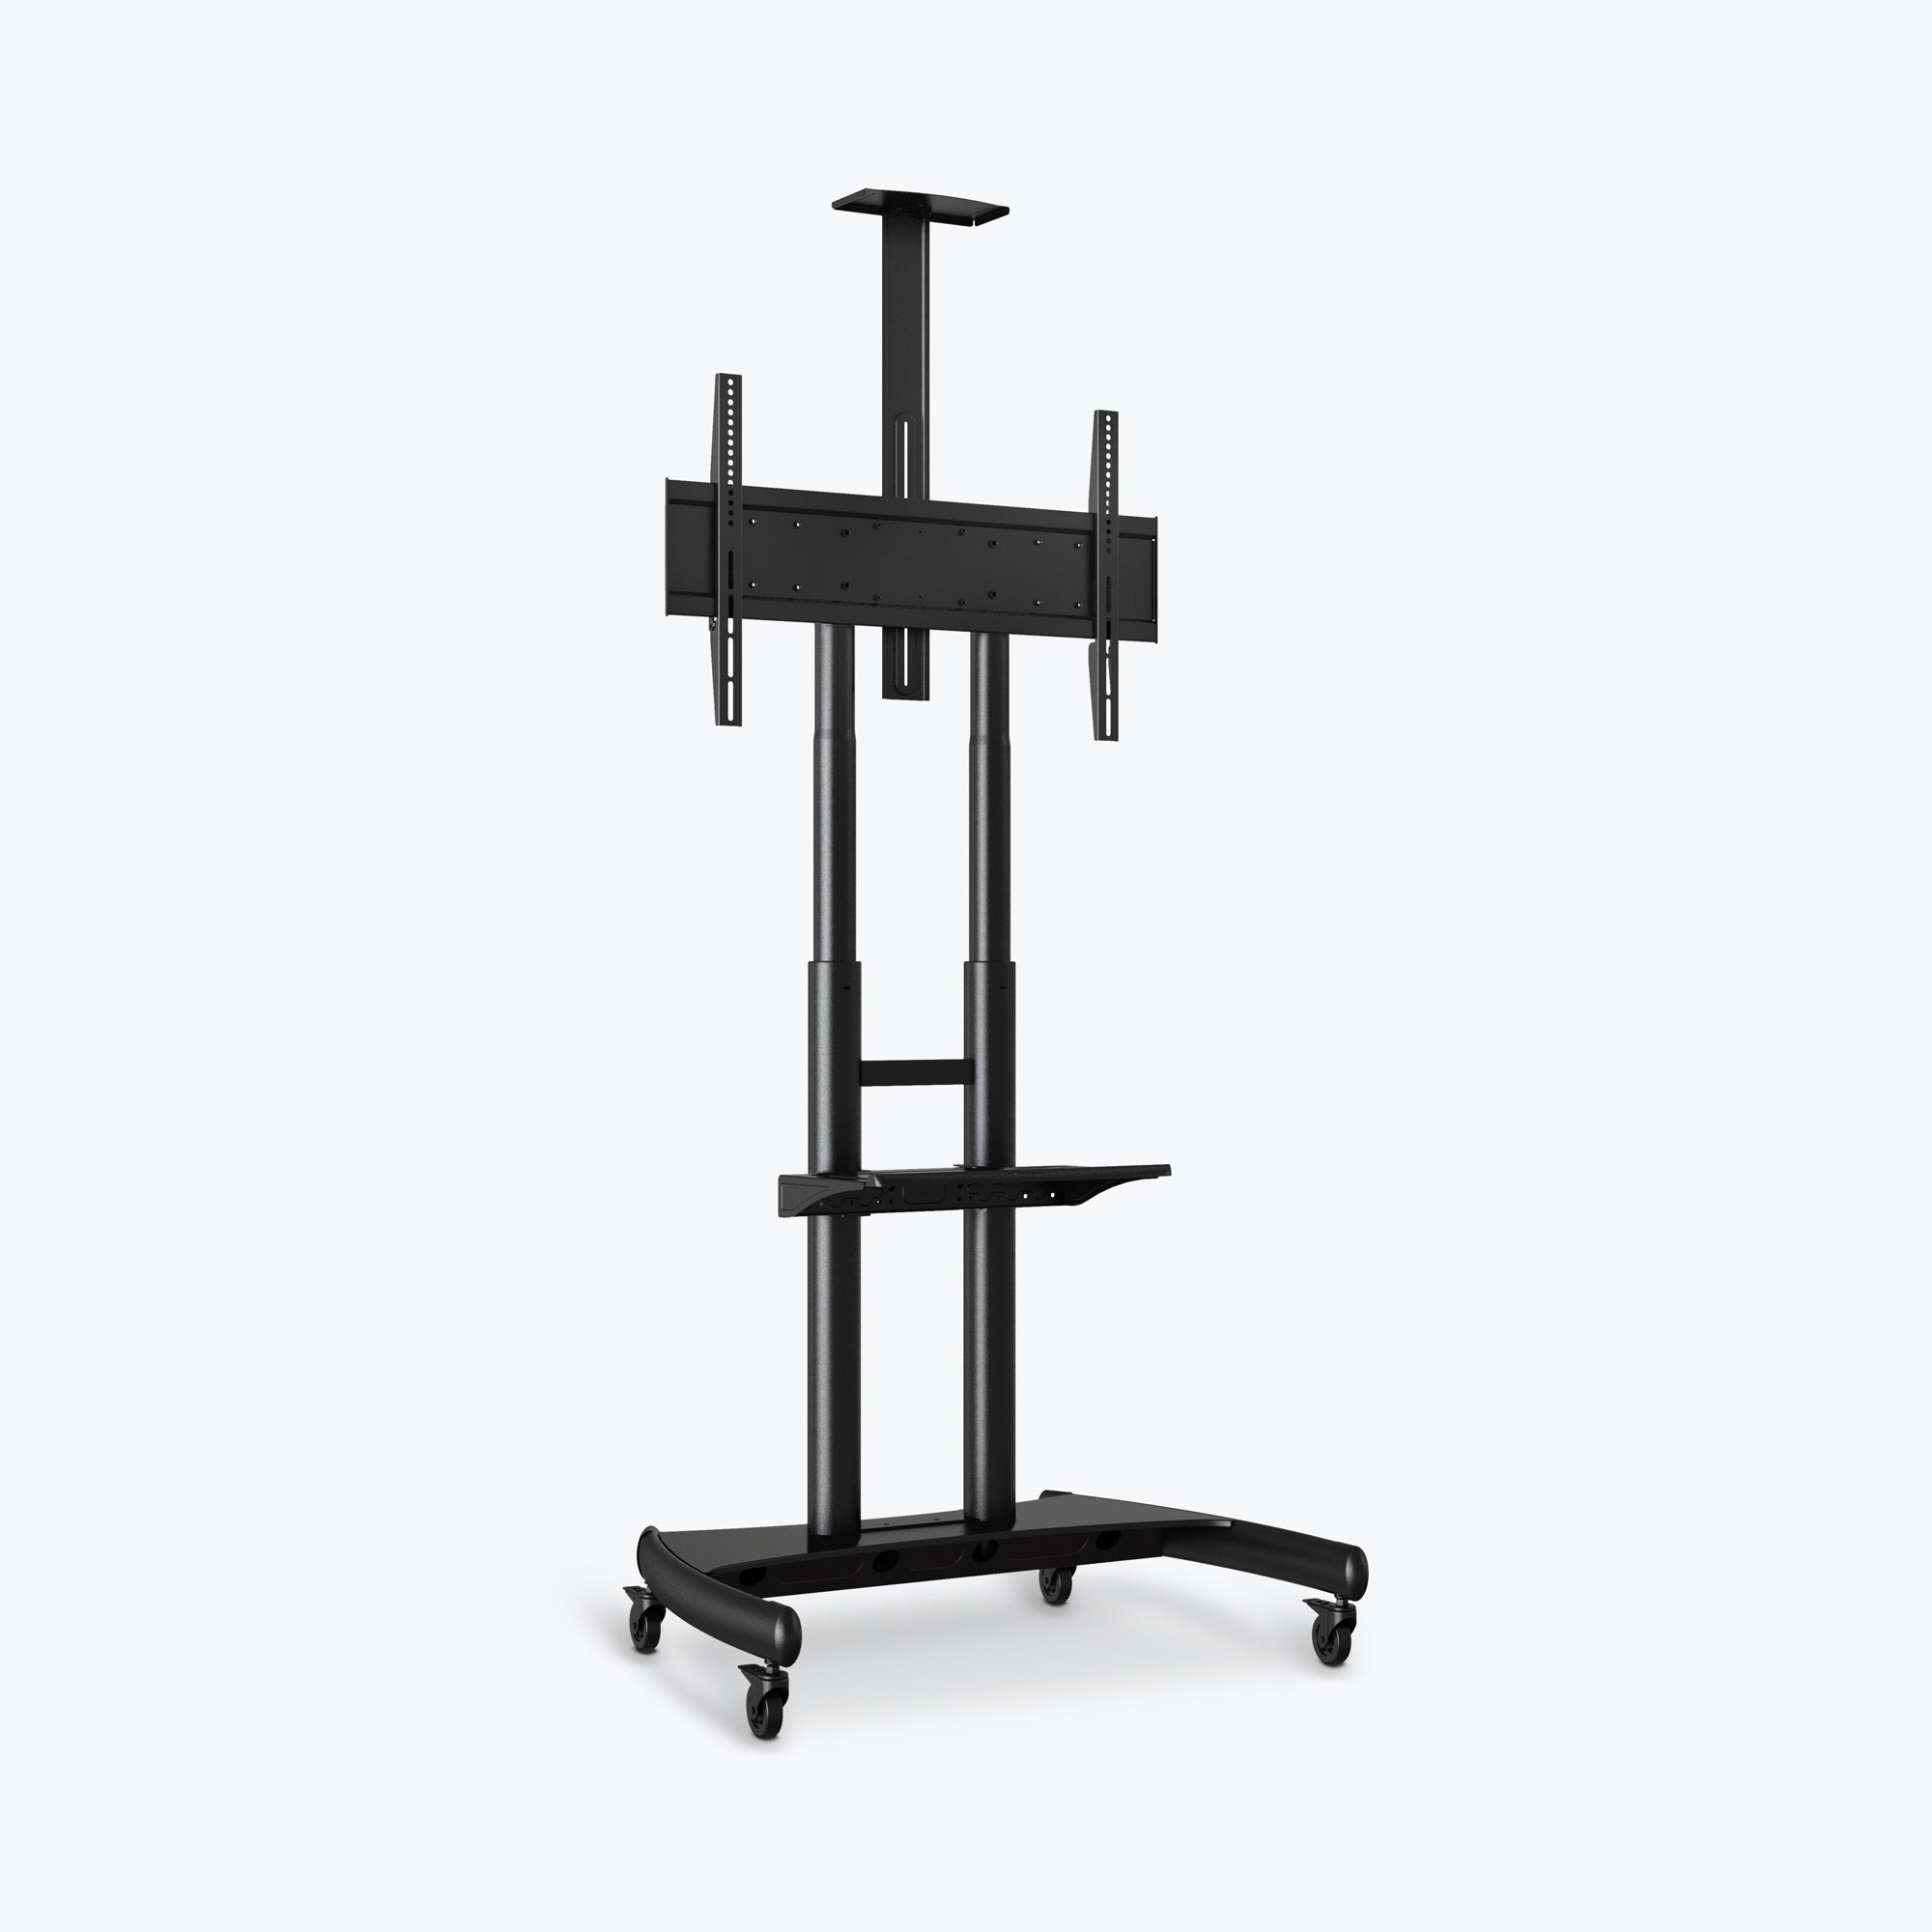 Luxor Large Adjustable Height TV Stand 39.25"W x 28.25"D x 48" to 65"H (Black) - FP4000